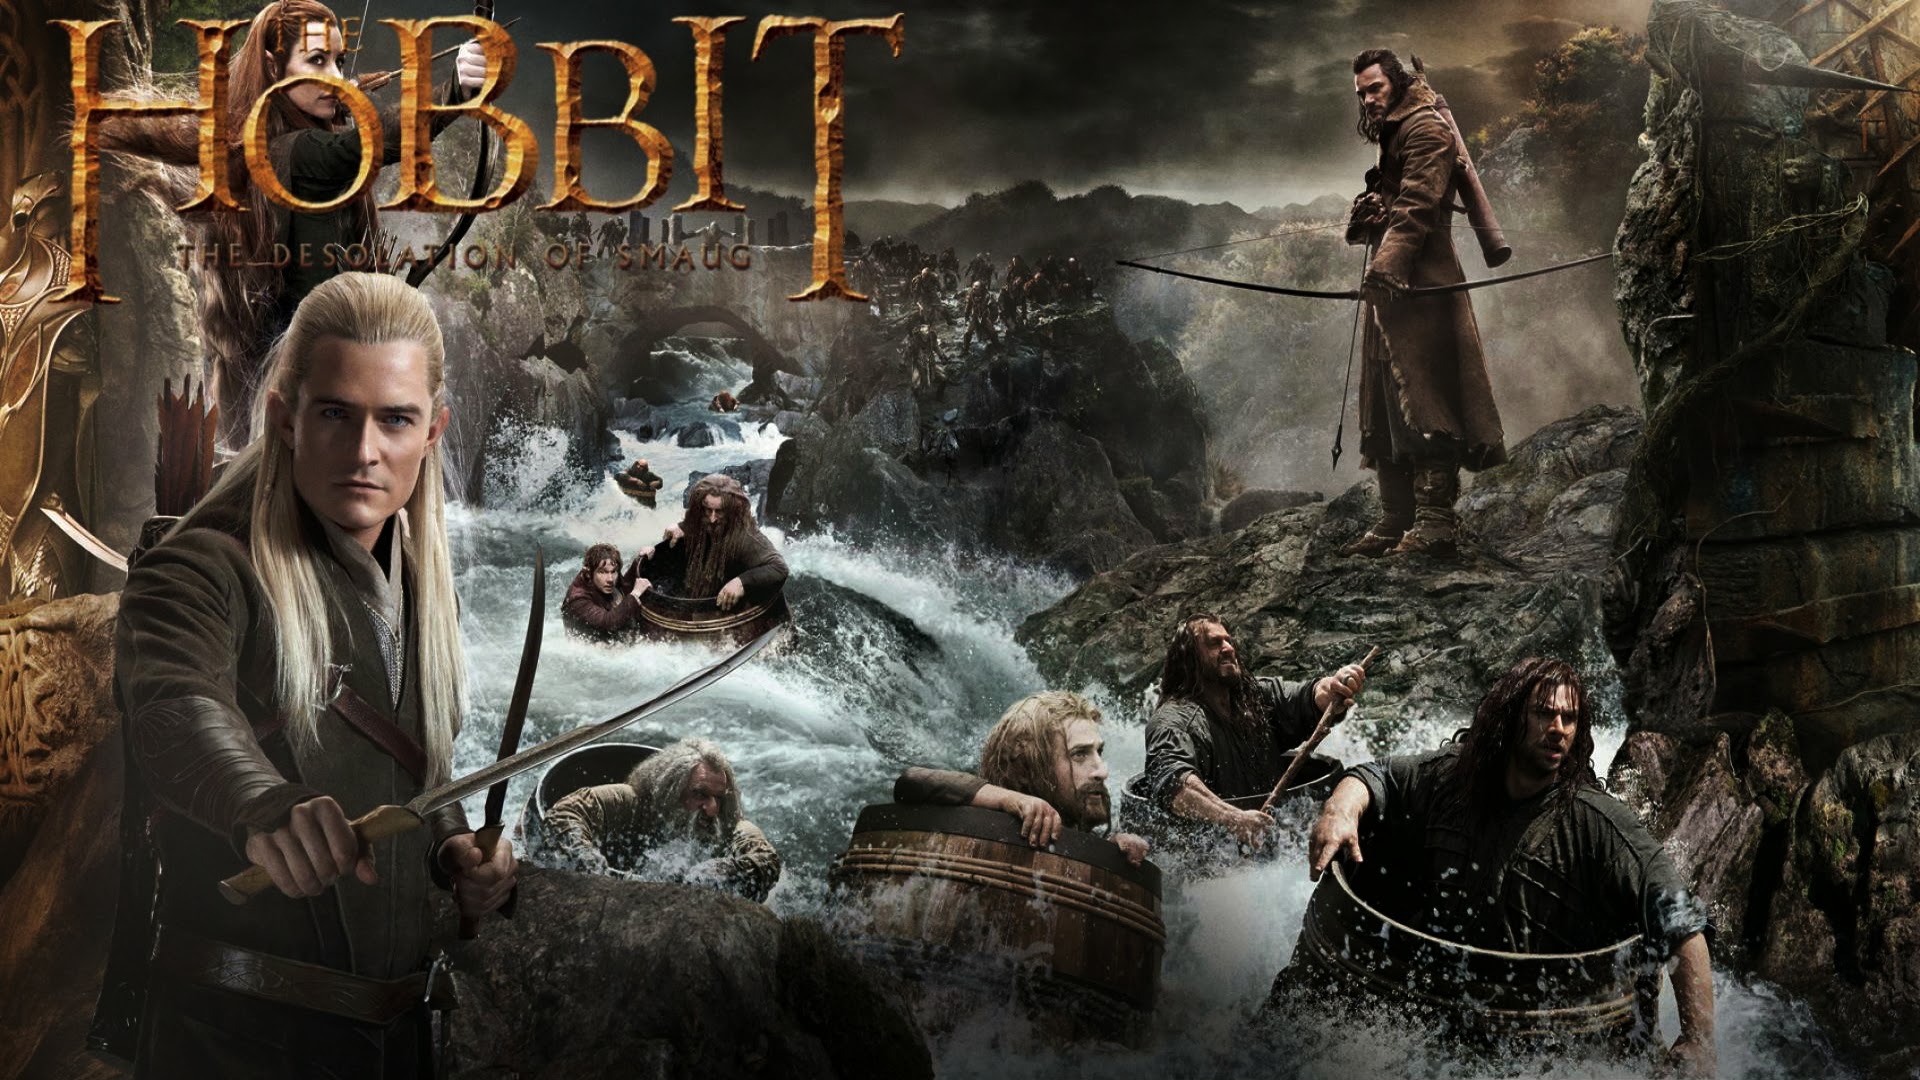 The Hobbit Wallpaper High Definition Quality